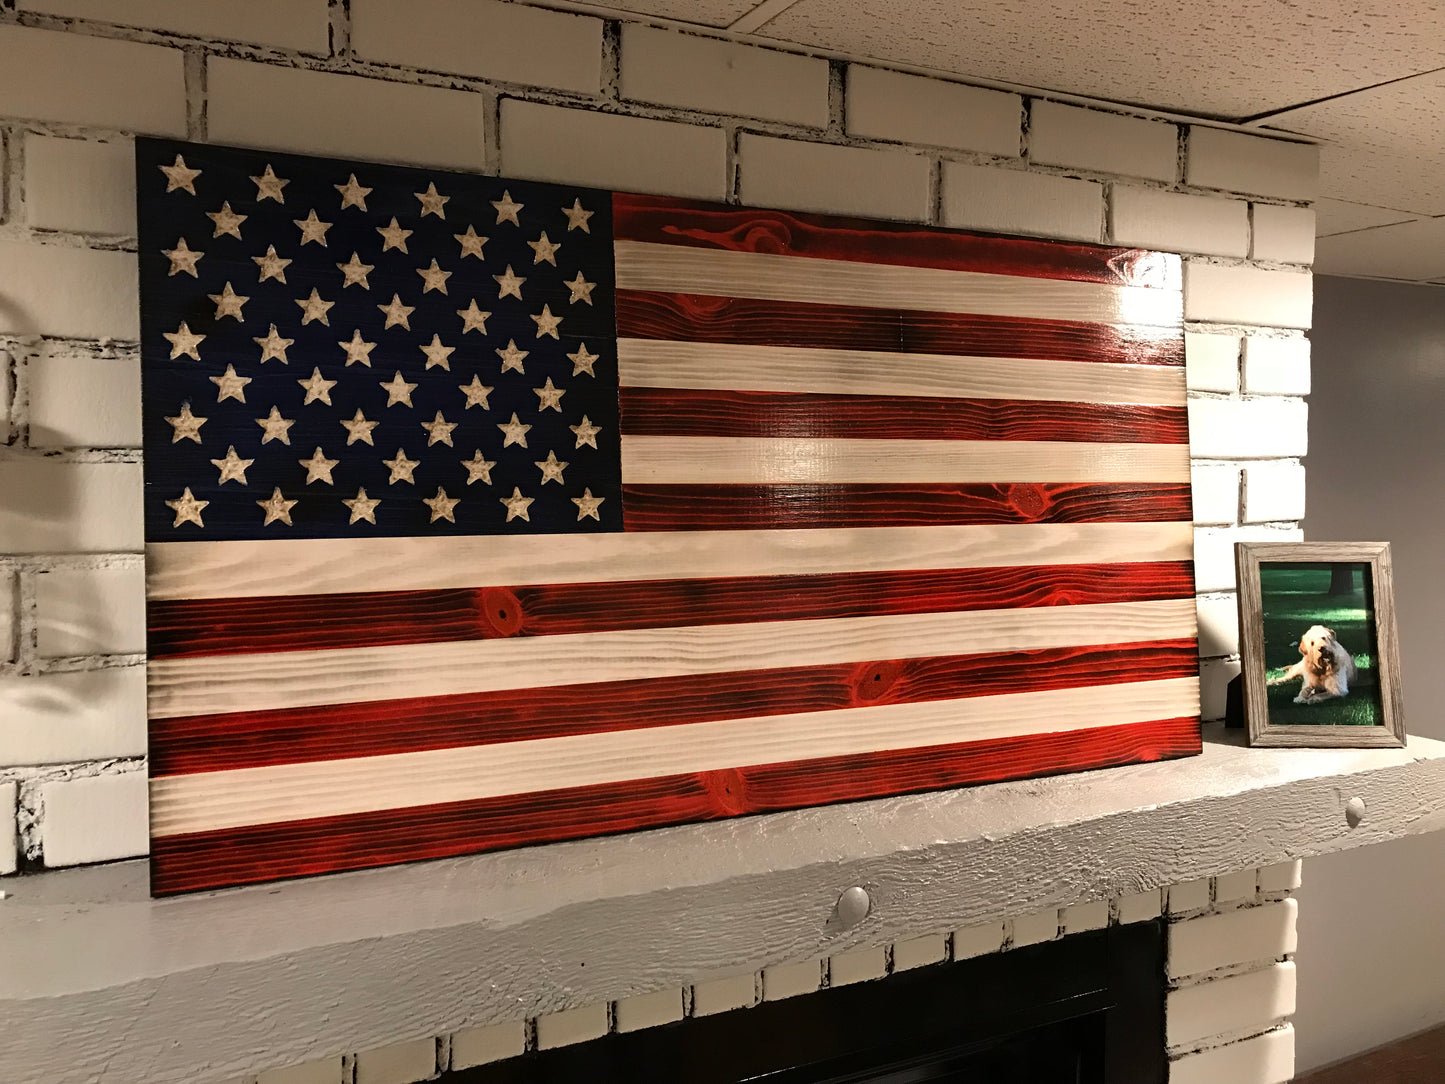 The Original Red, White and Blue Concealment Flag - American Flag